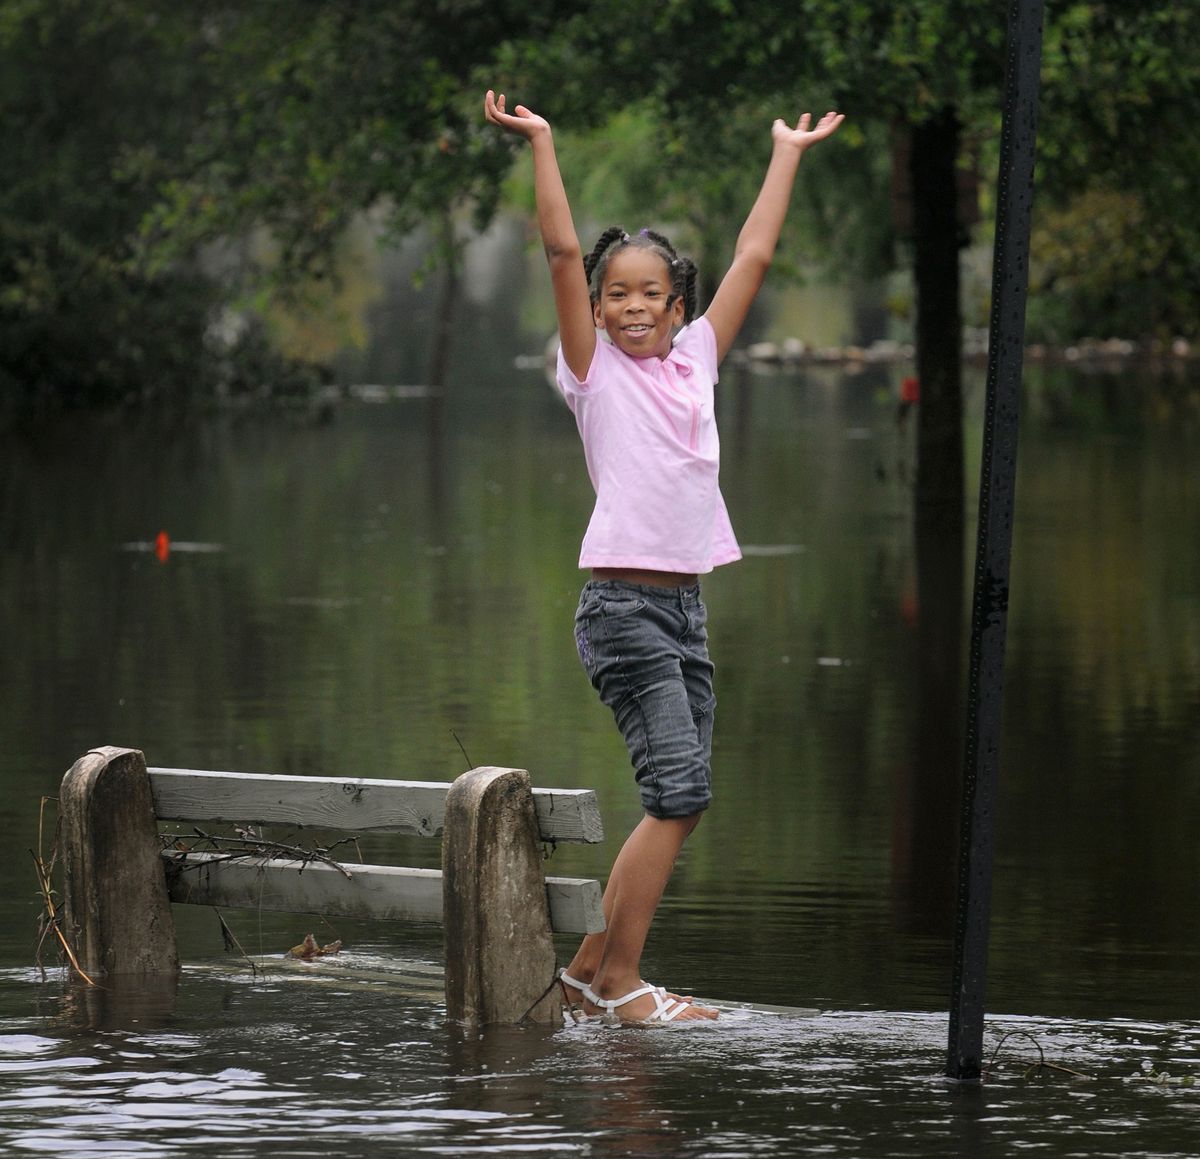 Journey Wooten, 8, stands on the base of a bench that is submerged in Jacksonville, Fla.  (AP/The Florida Times-Union, Kelly Jordan) 